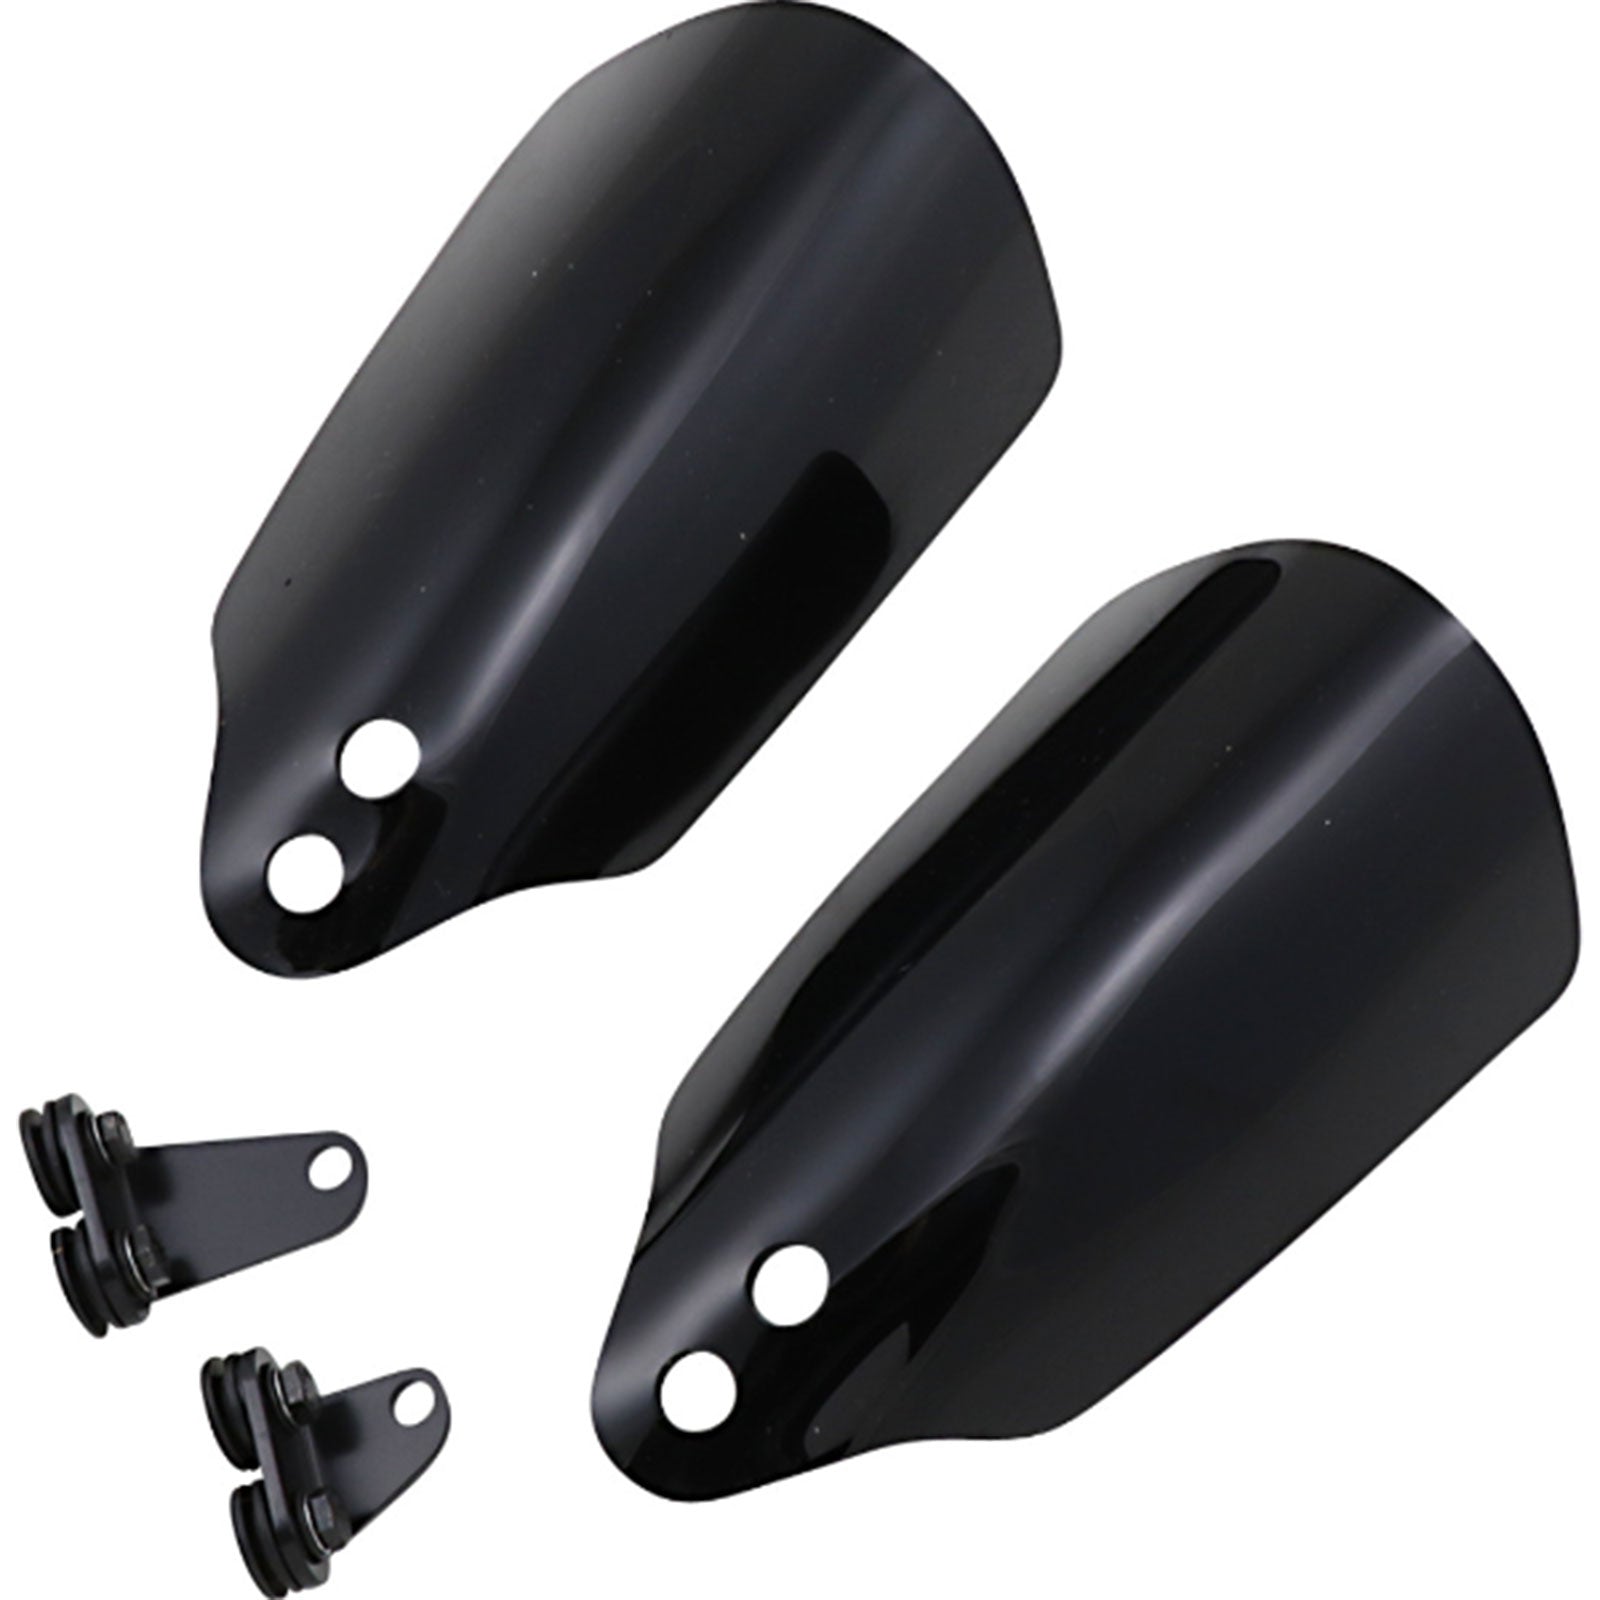 Memphis Shades MEB7215 Handguards Motorcycle Accessories-0635